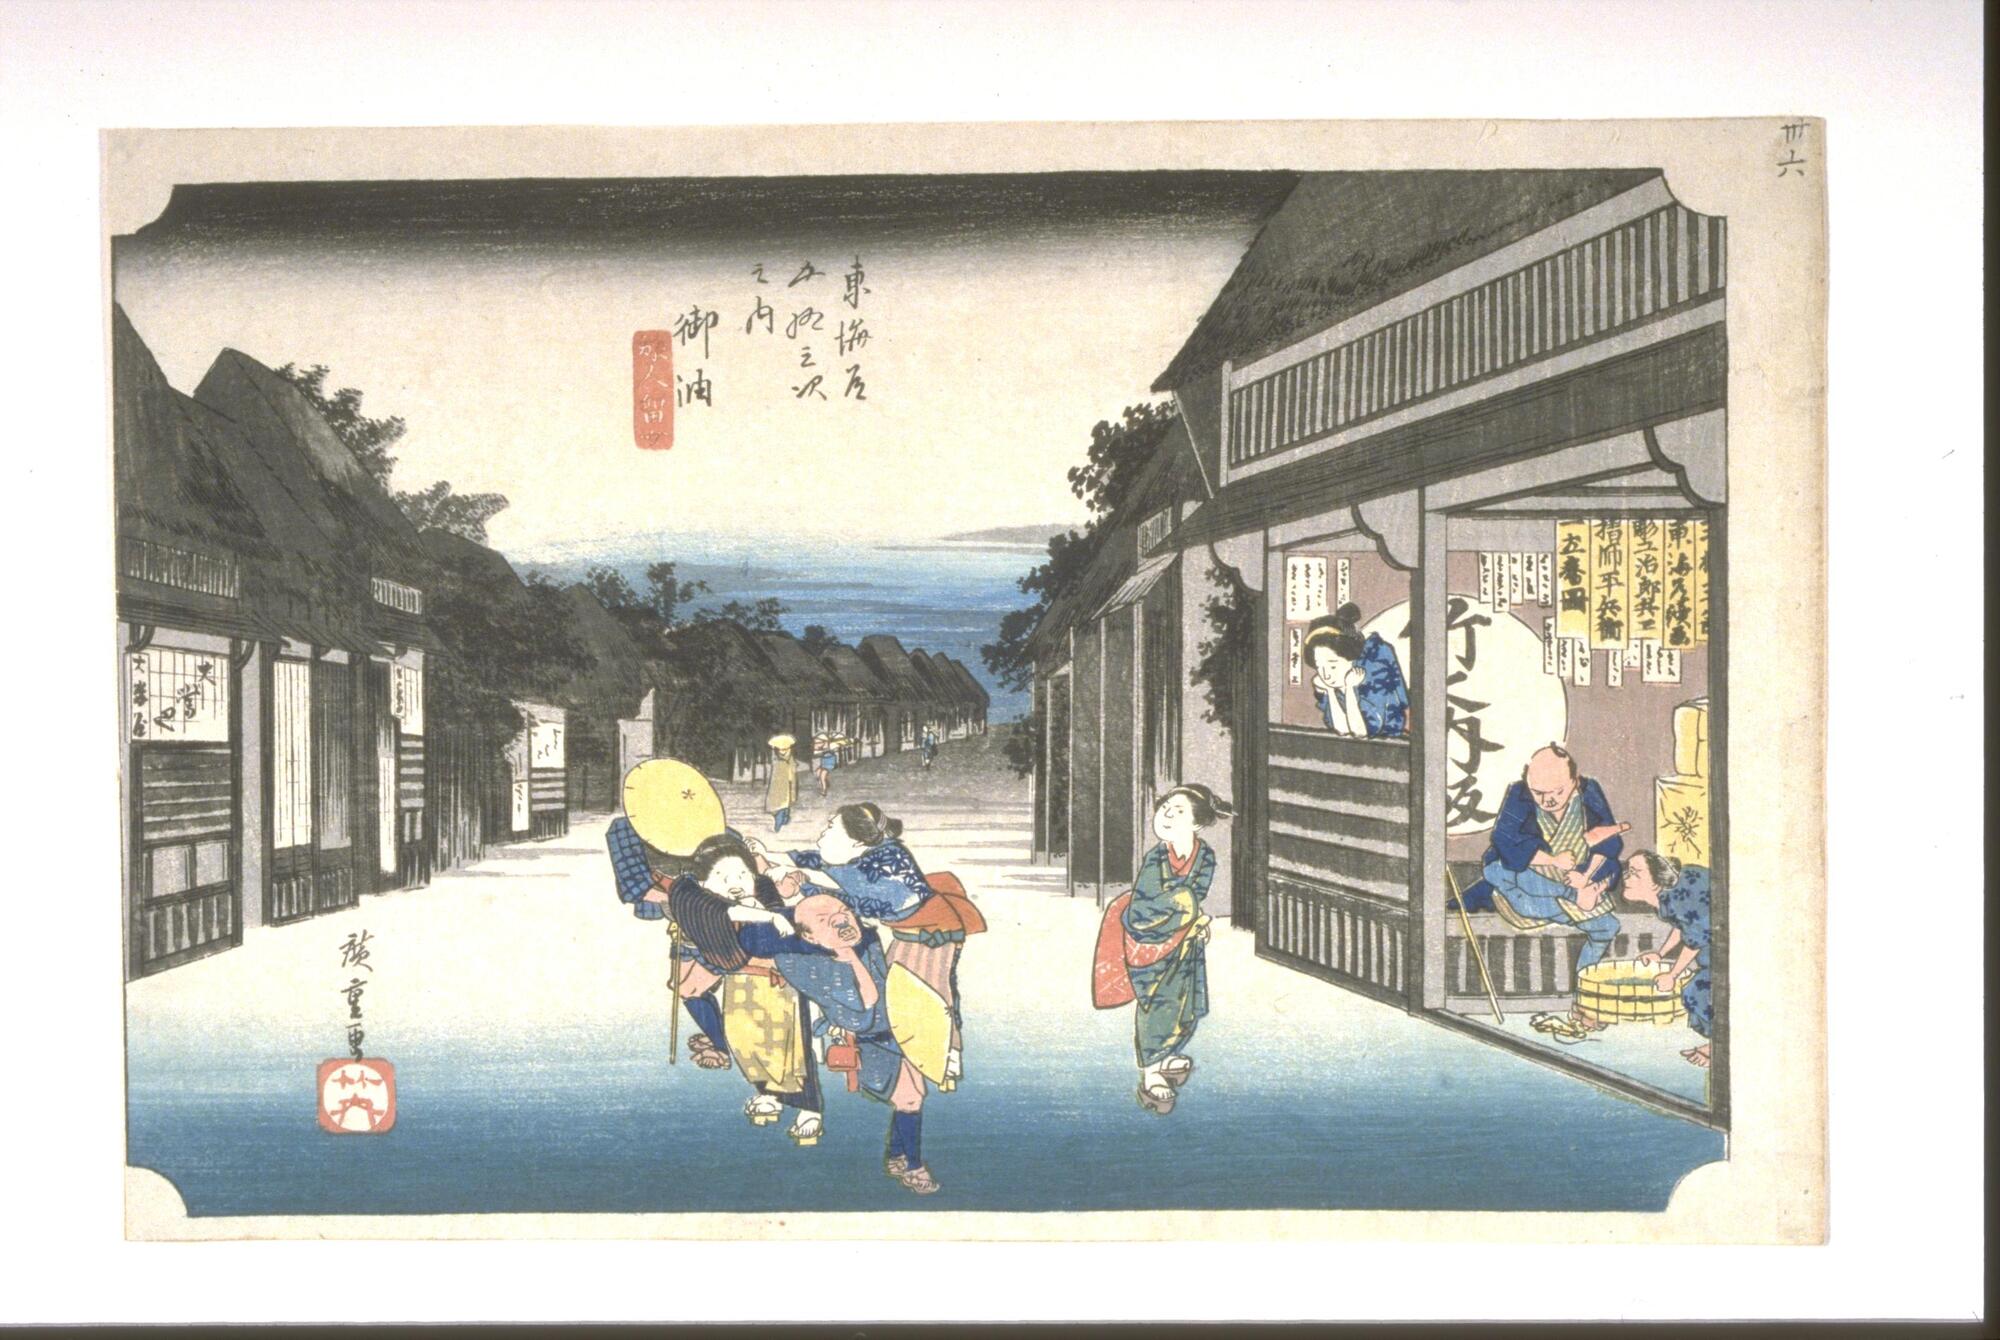 In the main street of Goyu village at nightfall, female touts aggressively solicit travelers by dragging them into the tea-house on the right, where one is already resting. The large circle on the wall bears the sign of the publisher of the series, Take-no-Uchi, which was omitted in later issues. On the sign-boards inside are given the names of the engraver, Firobei; the printer, Heibei; and the artist, Ichiryusai.